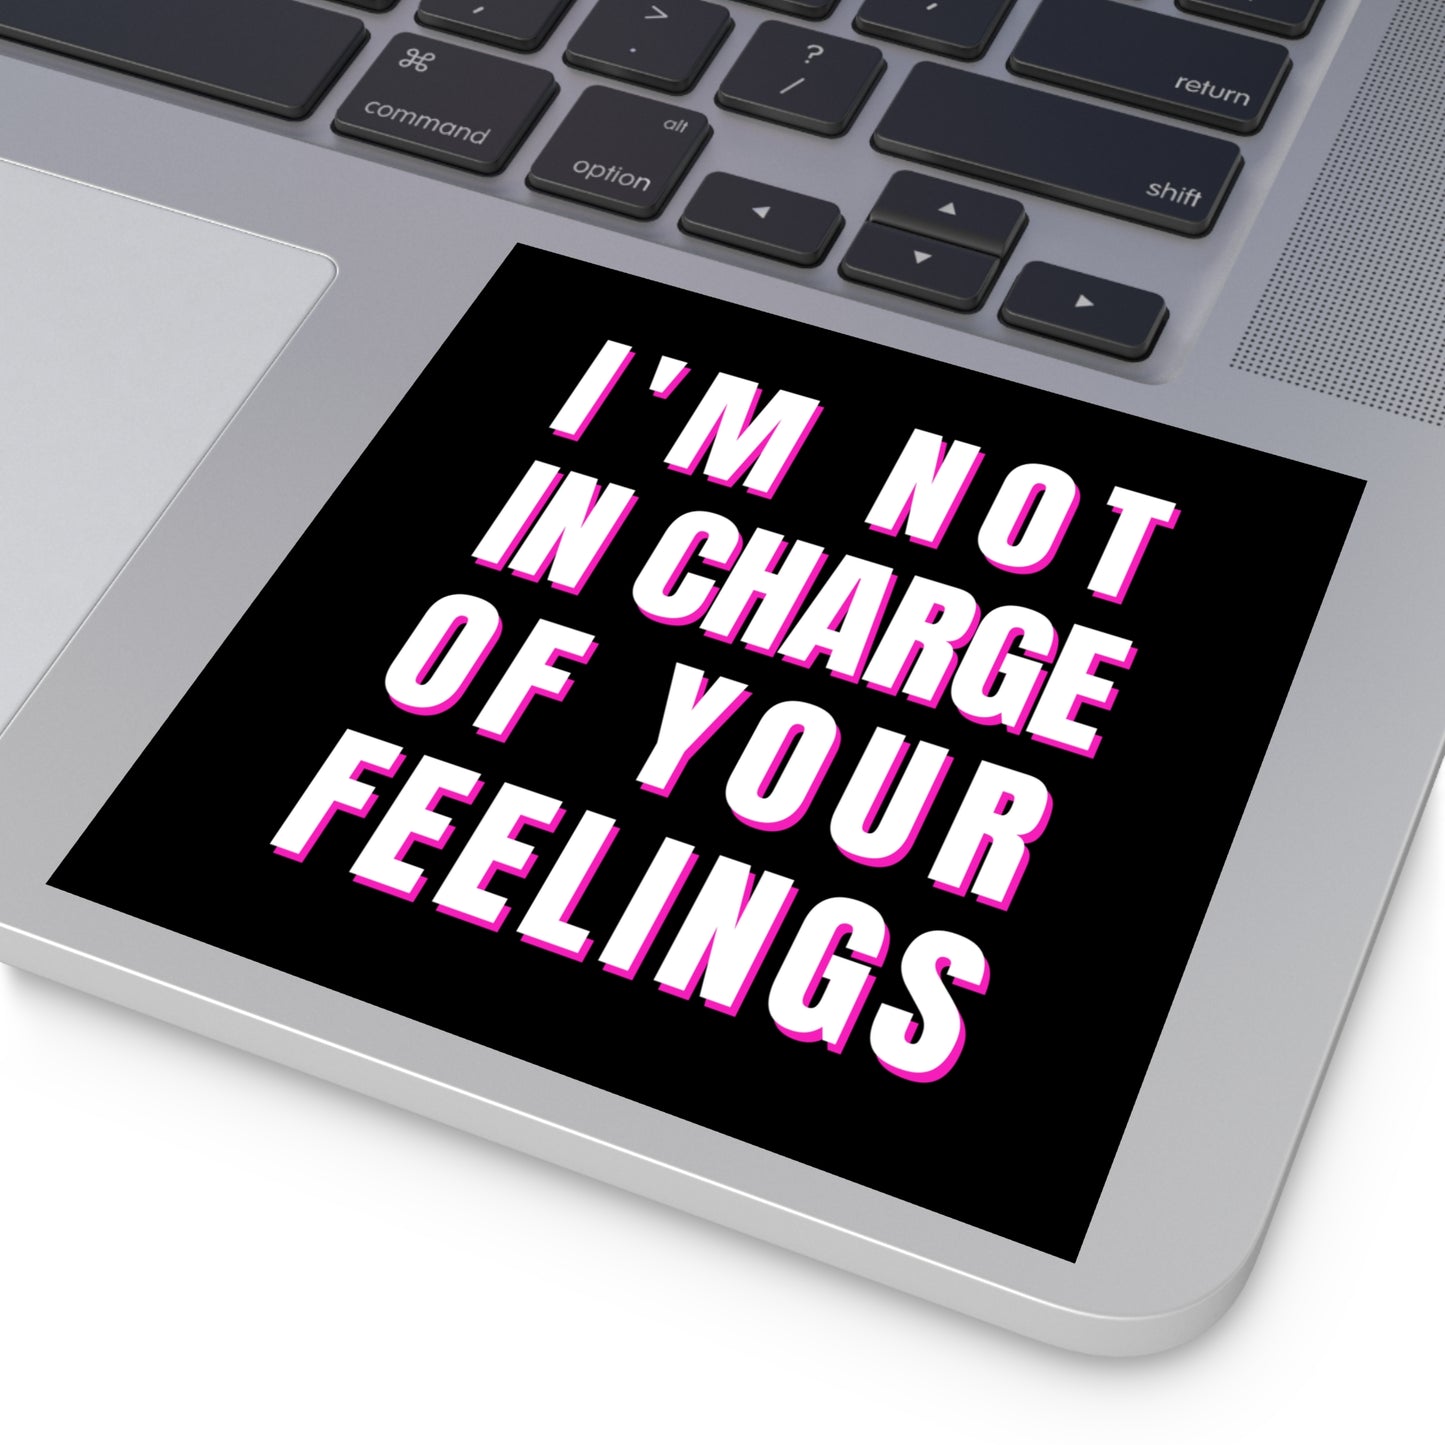 I'm Not In Charge Of Your Feelings Square Stickers, Indoor\Outdoor